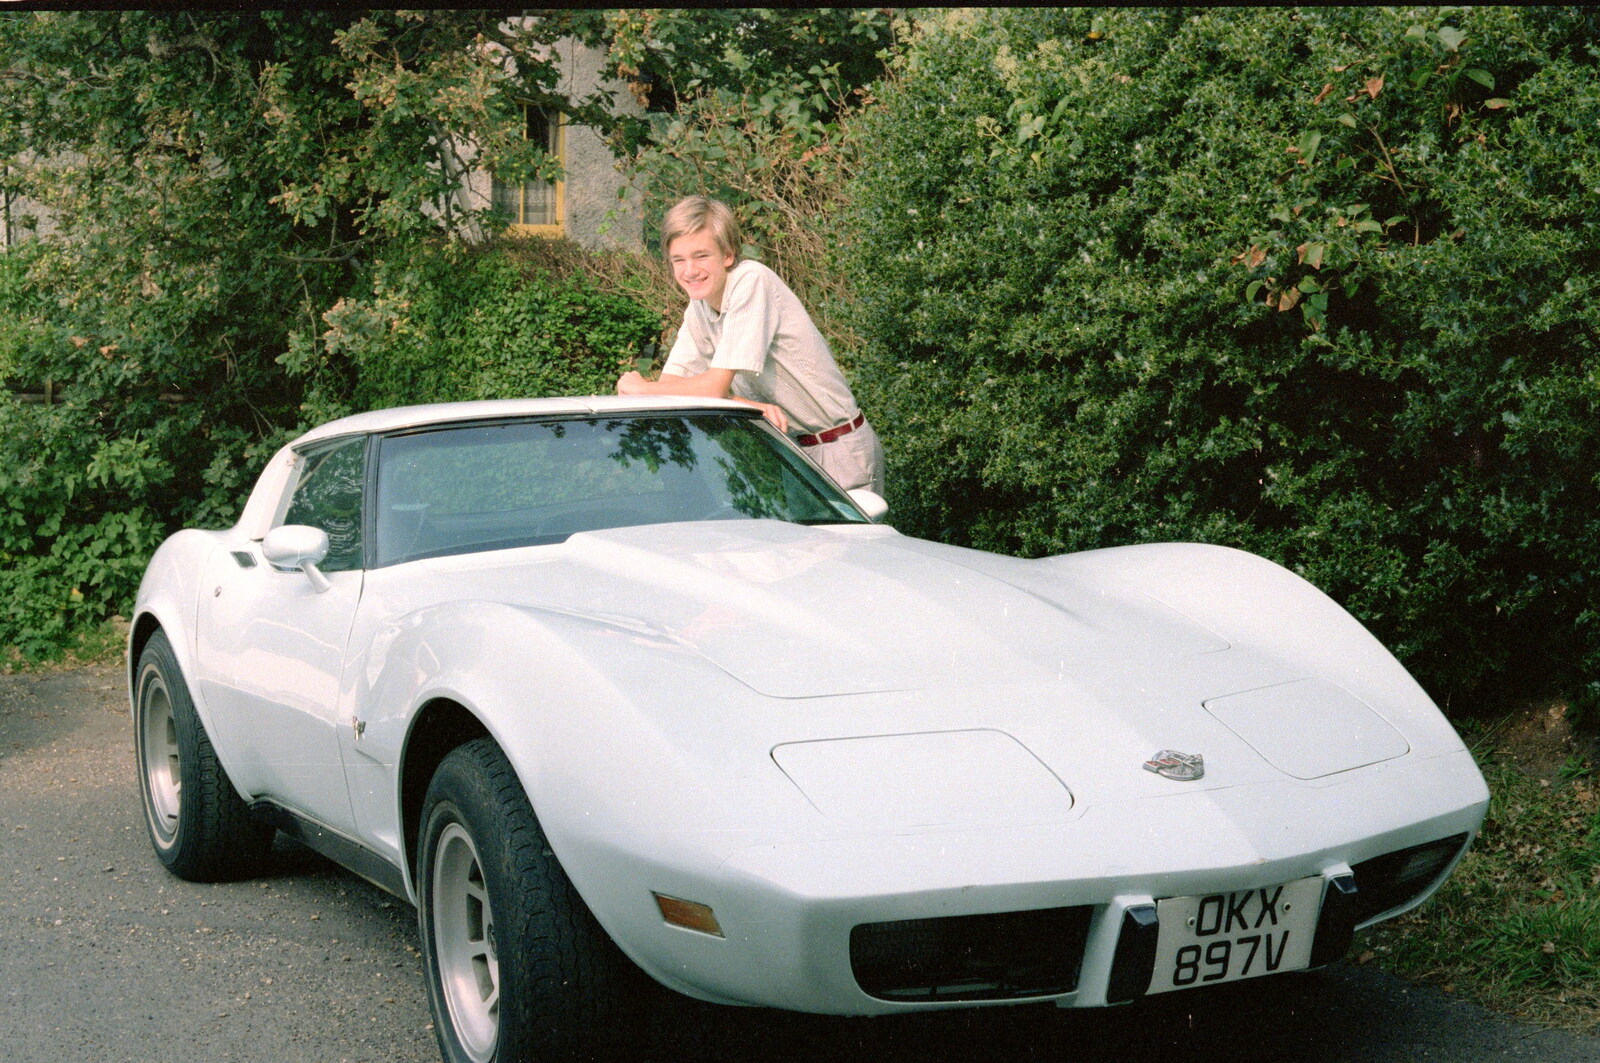 Nosher and Brian's 5.7-litre Corvette from The Last Day of Term, and Leaving New Milton, Hampshire - 18th September 1985